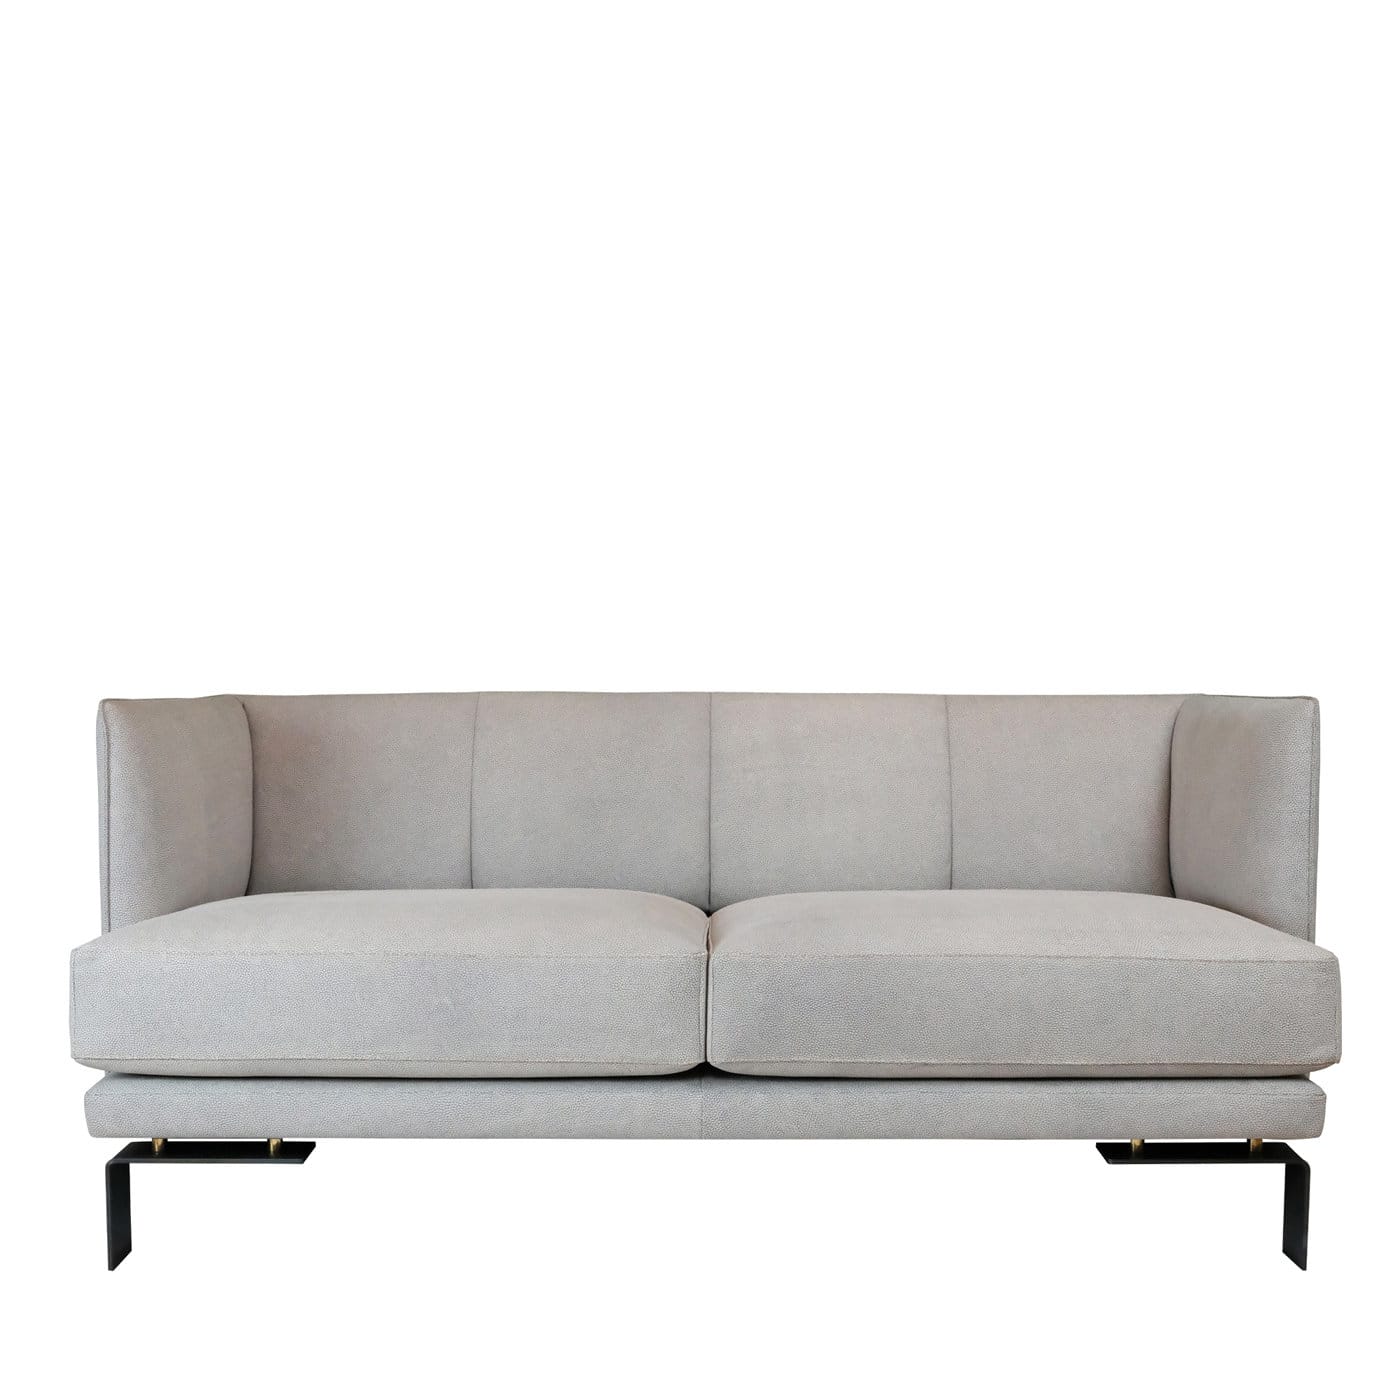 Met Beige Leather Sofa - Garbarino Collections